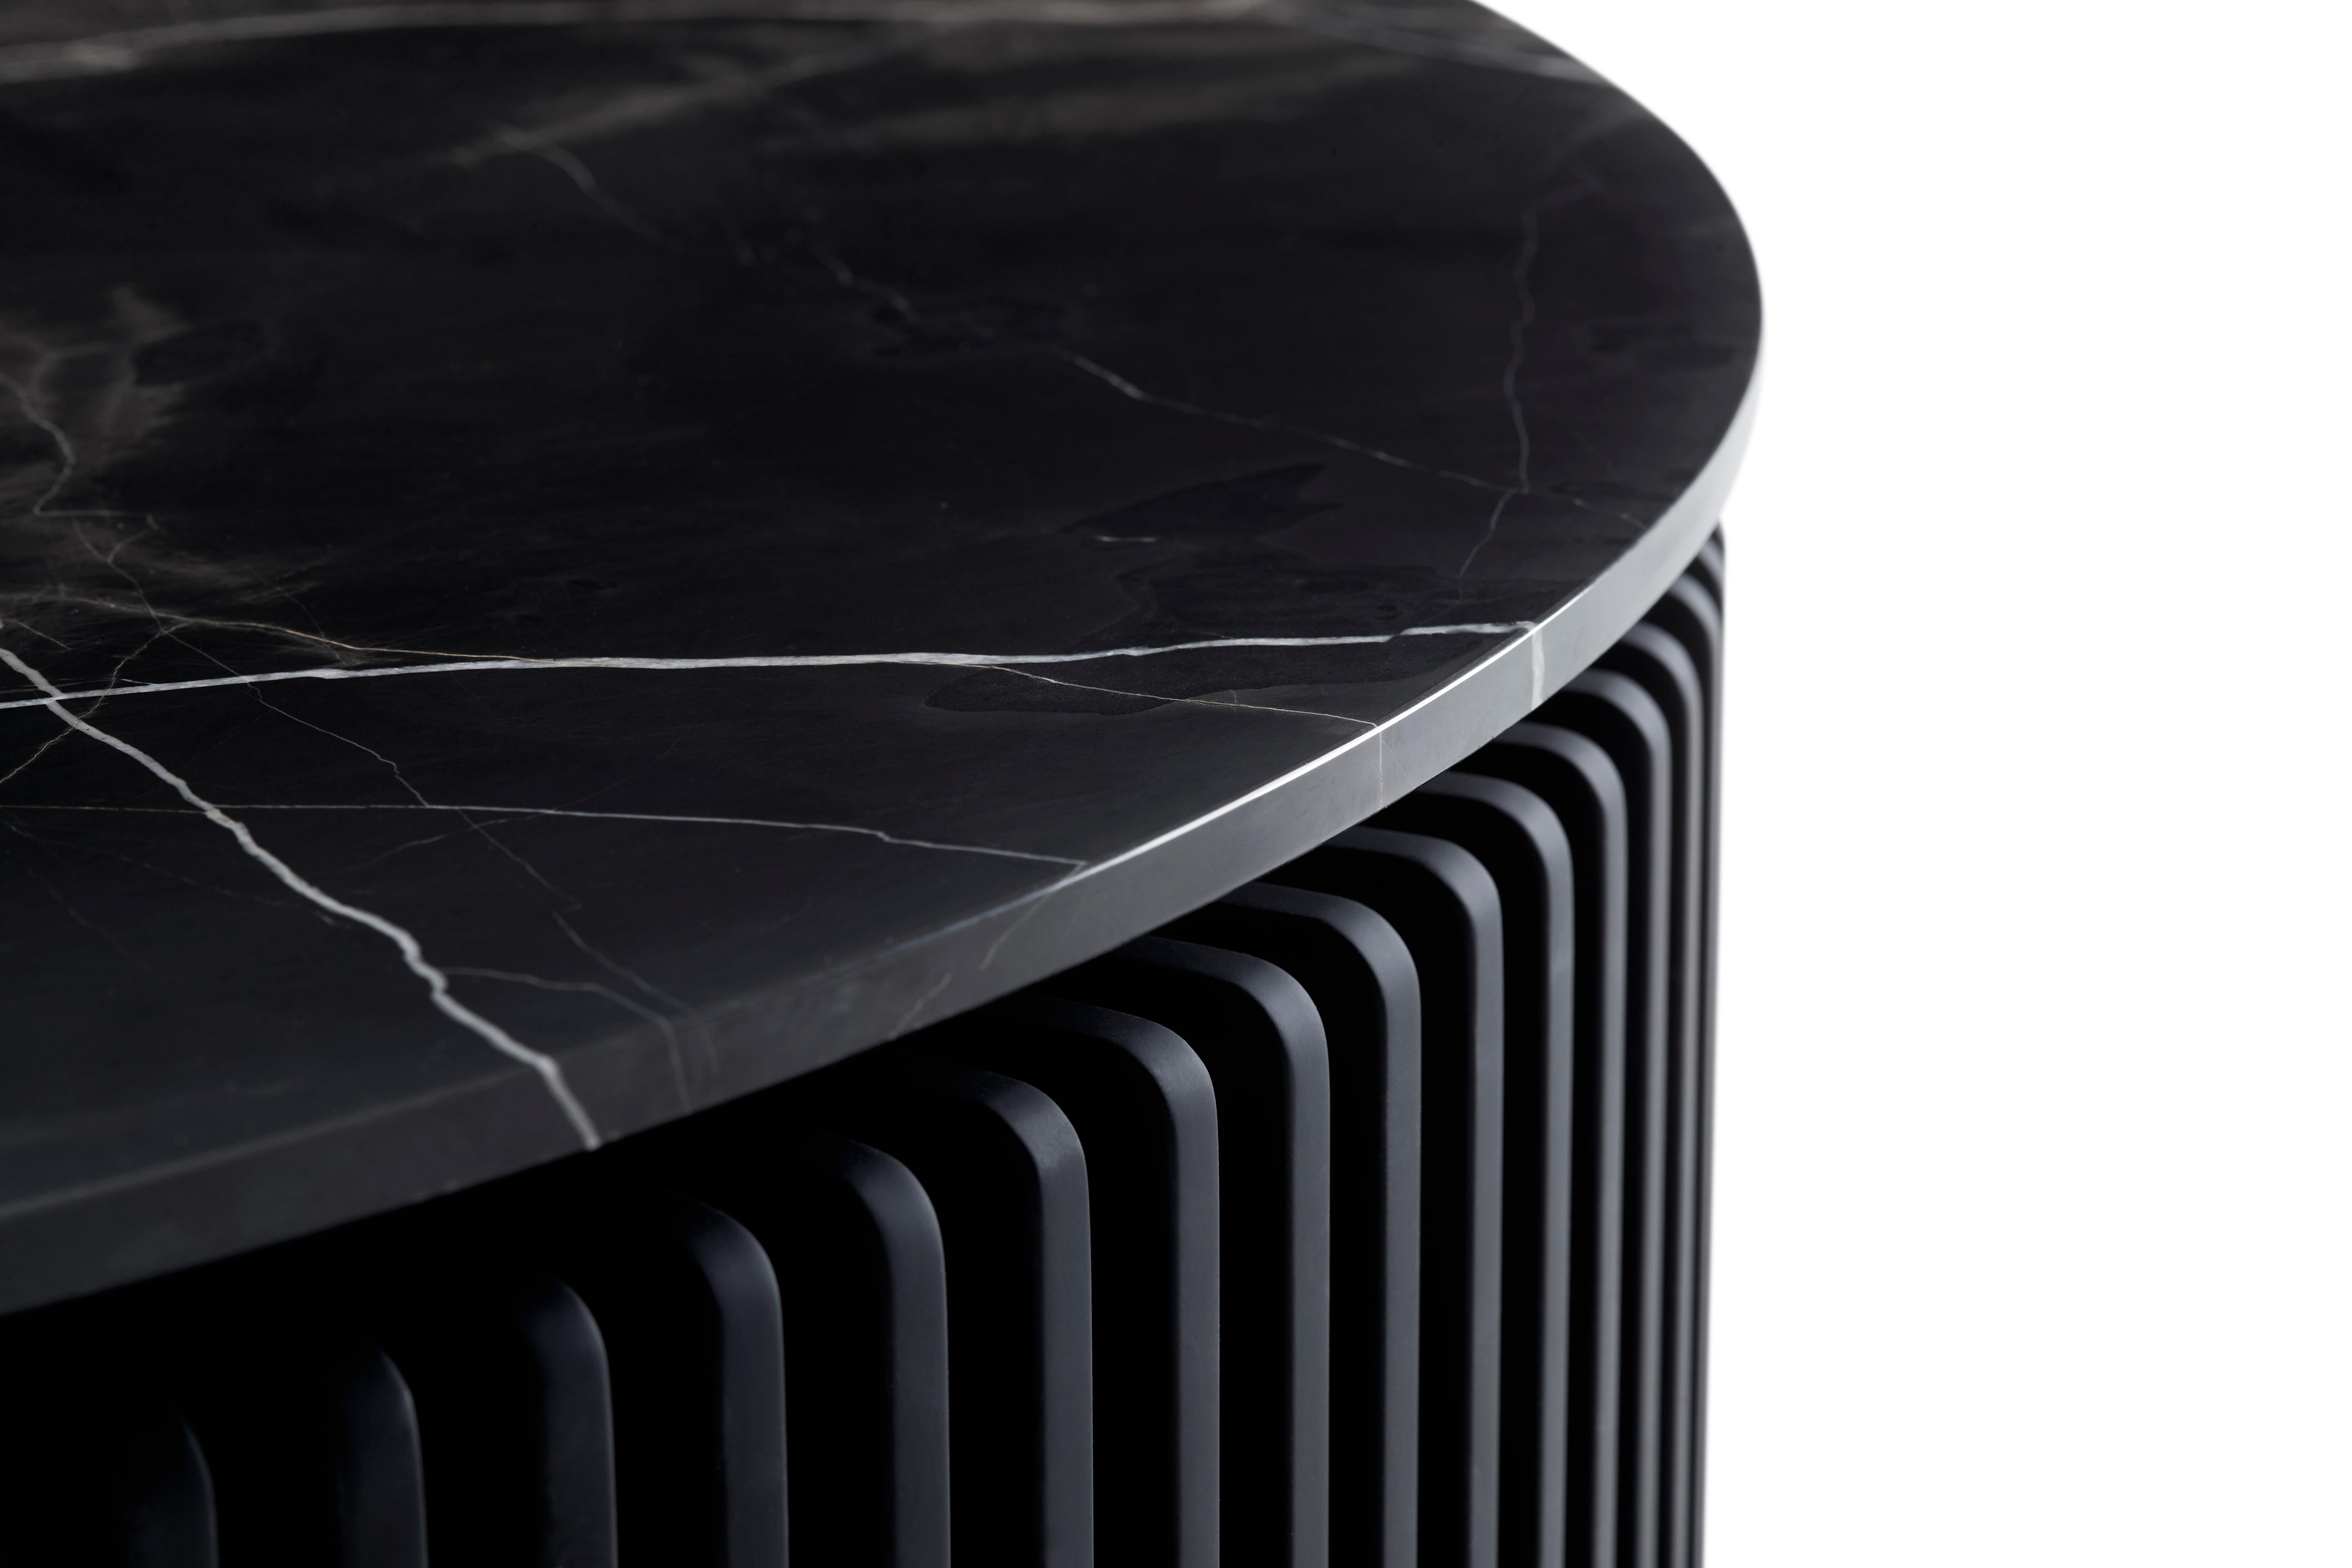 Pearl: This unique artisan made table the wooden slats are produced one by one and painted in softtouch black color before fitting. The tabletop is made of Italian moonflower marble. This new product is produced by craftsmen who are leading experts